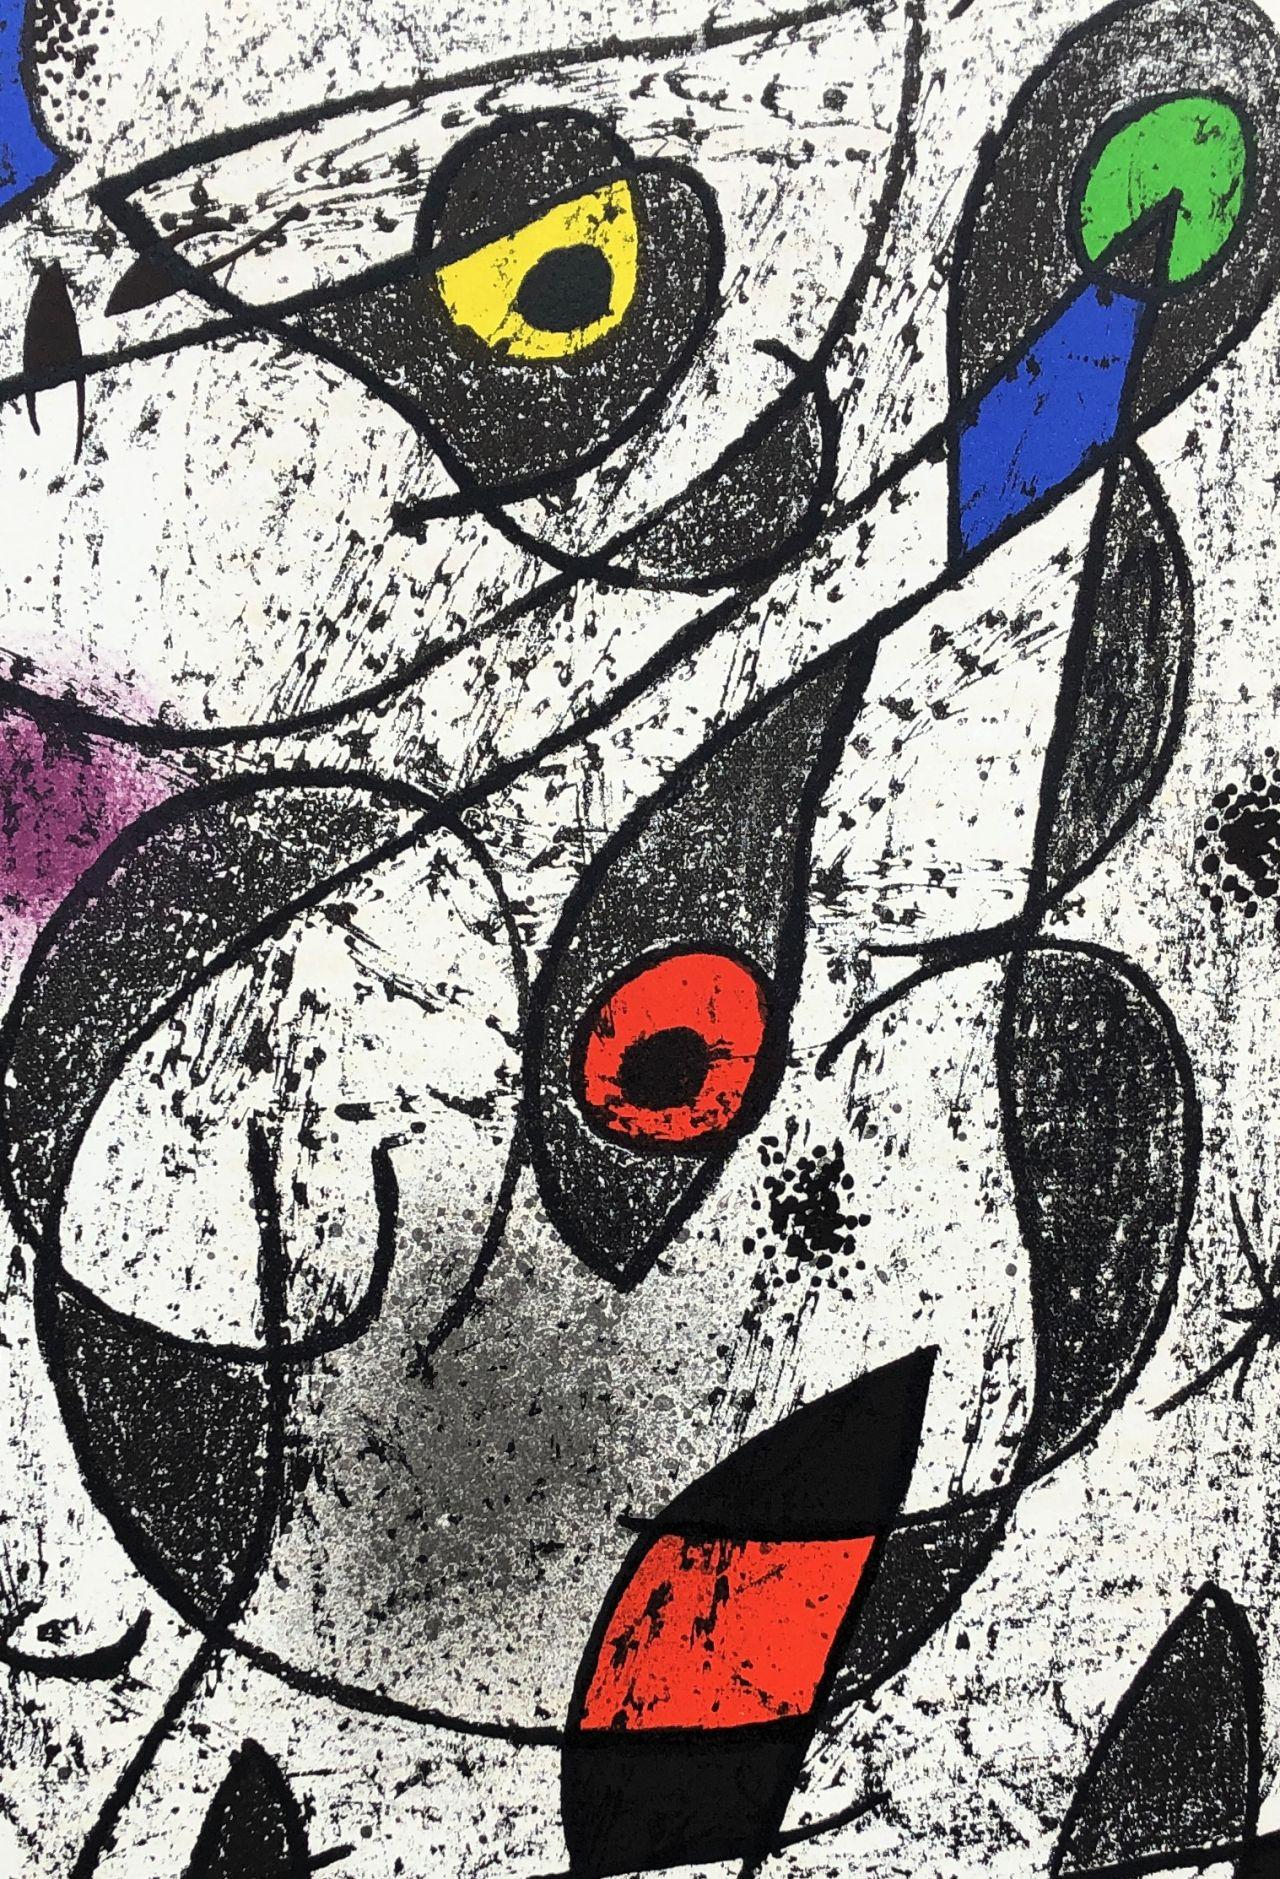 Two Flying Birds - Original Lithograph (Mourlot #838) - Print by Joan Miró